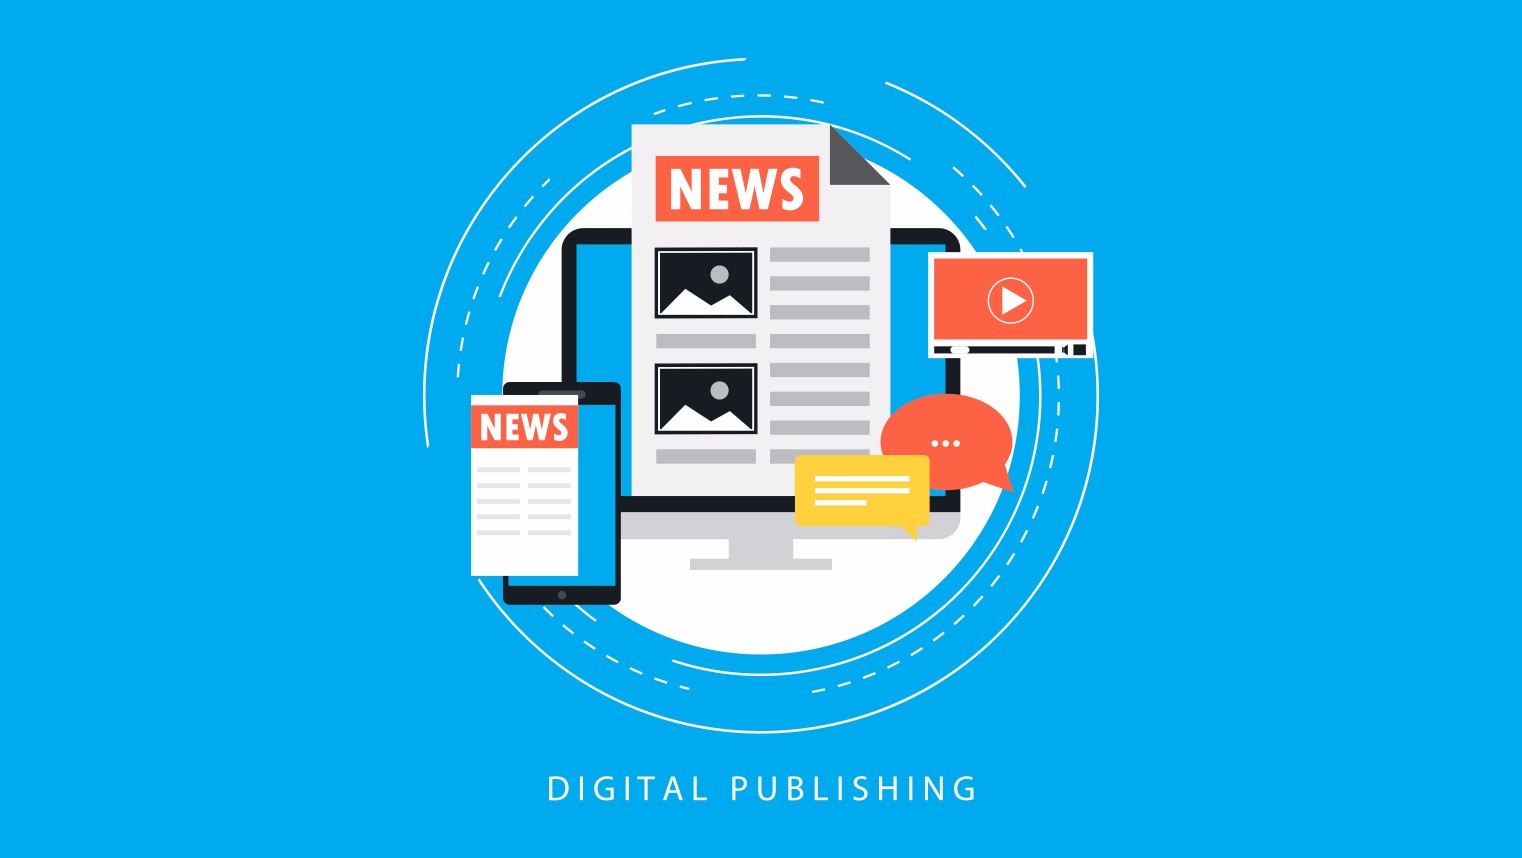 Linking News - Tips on How to Write an Effective Press Release